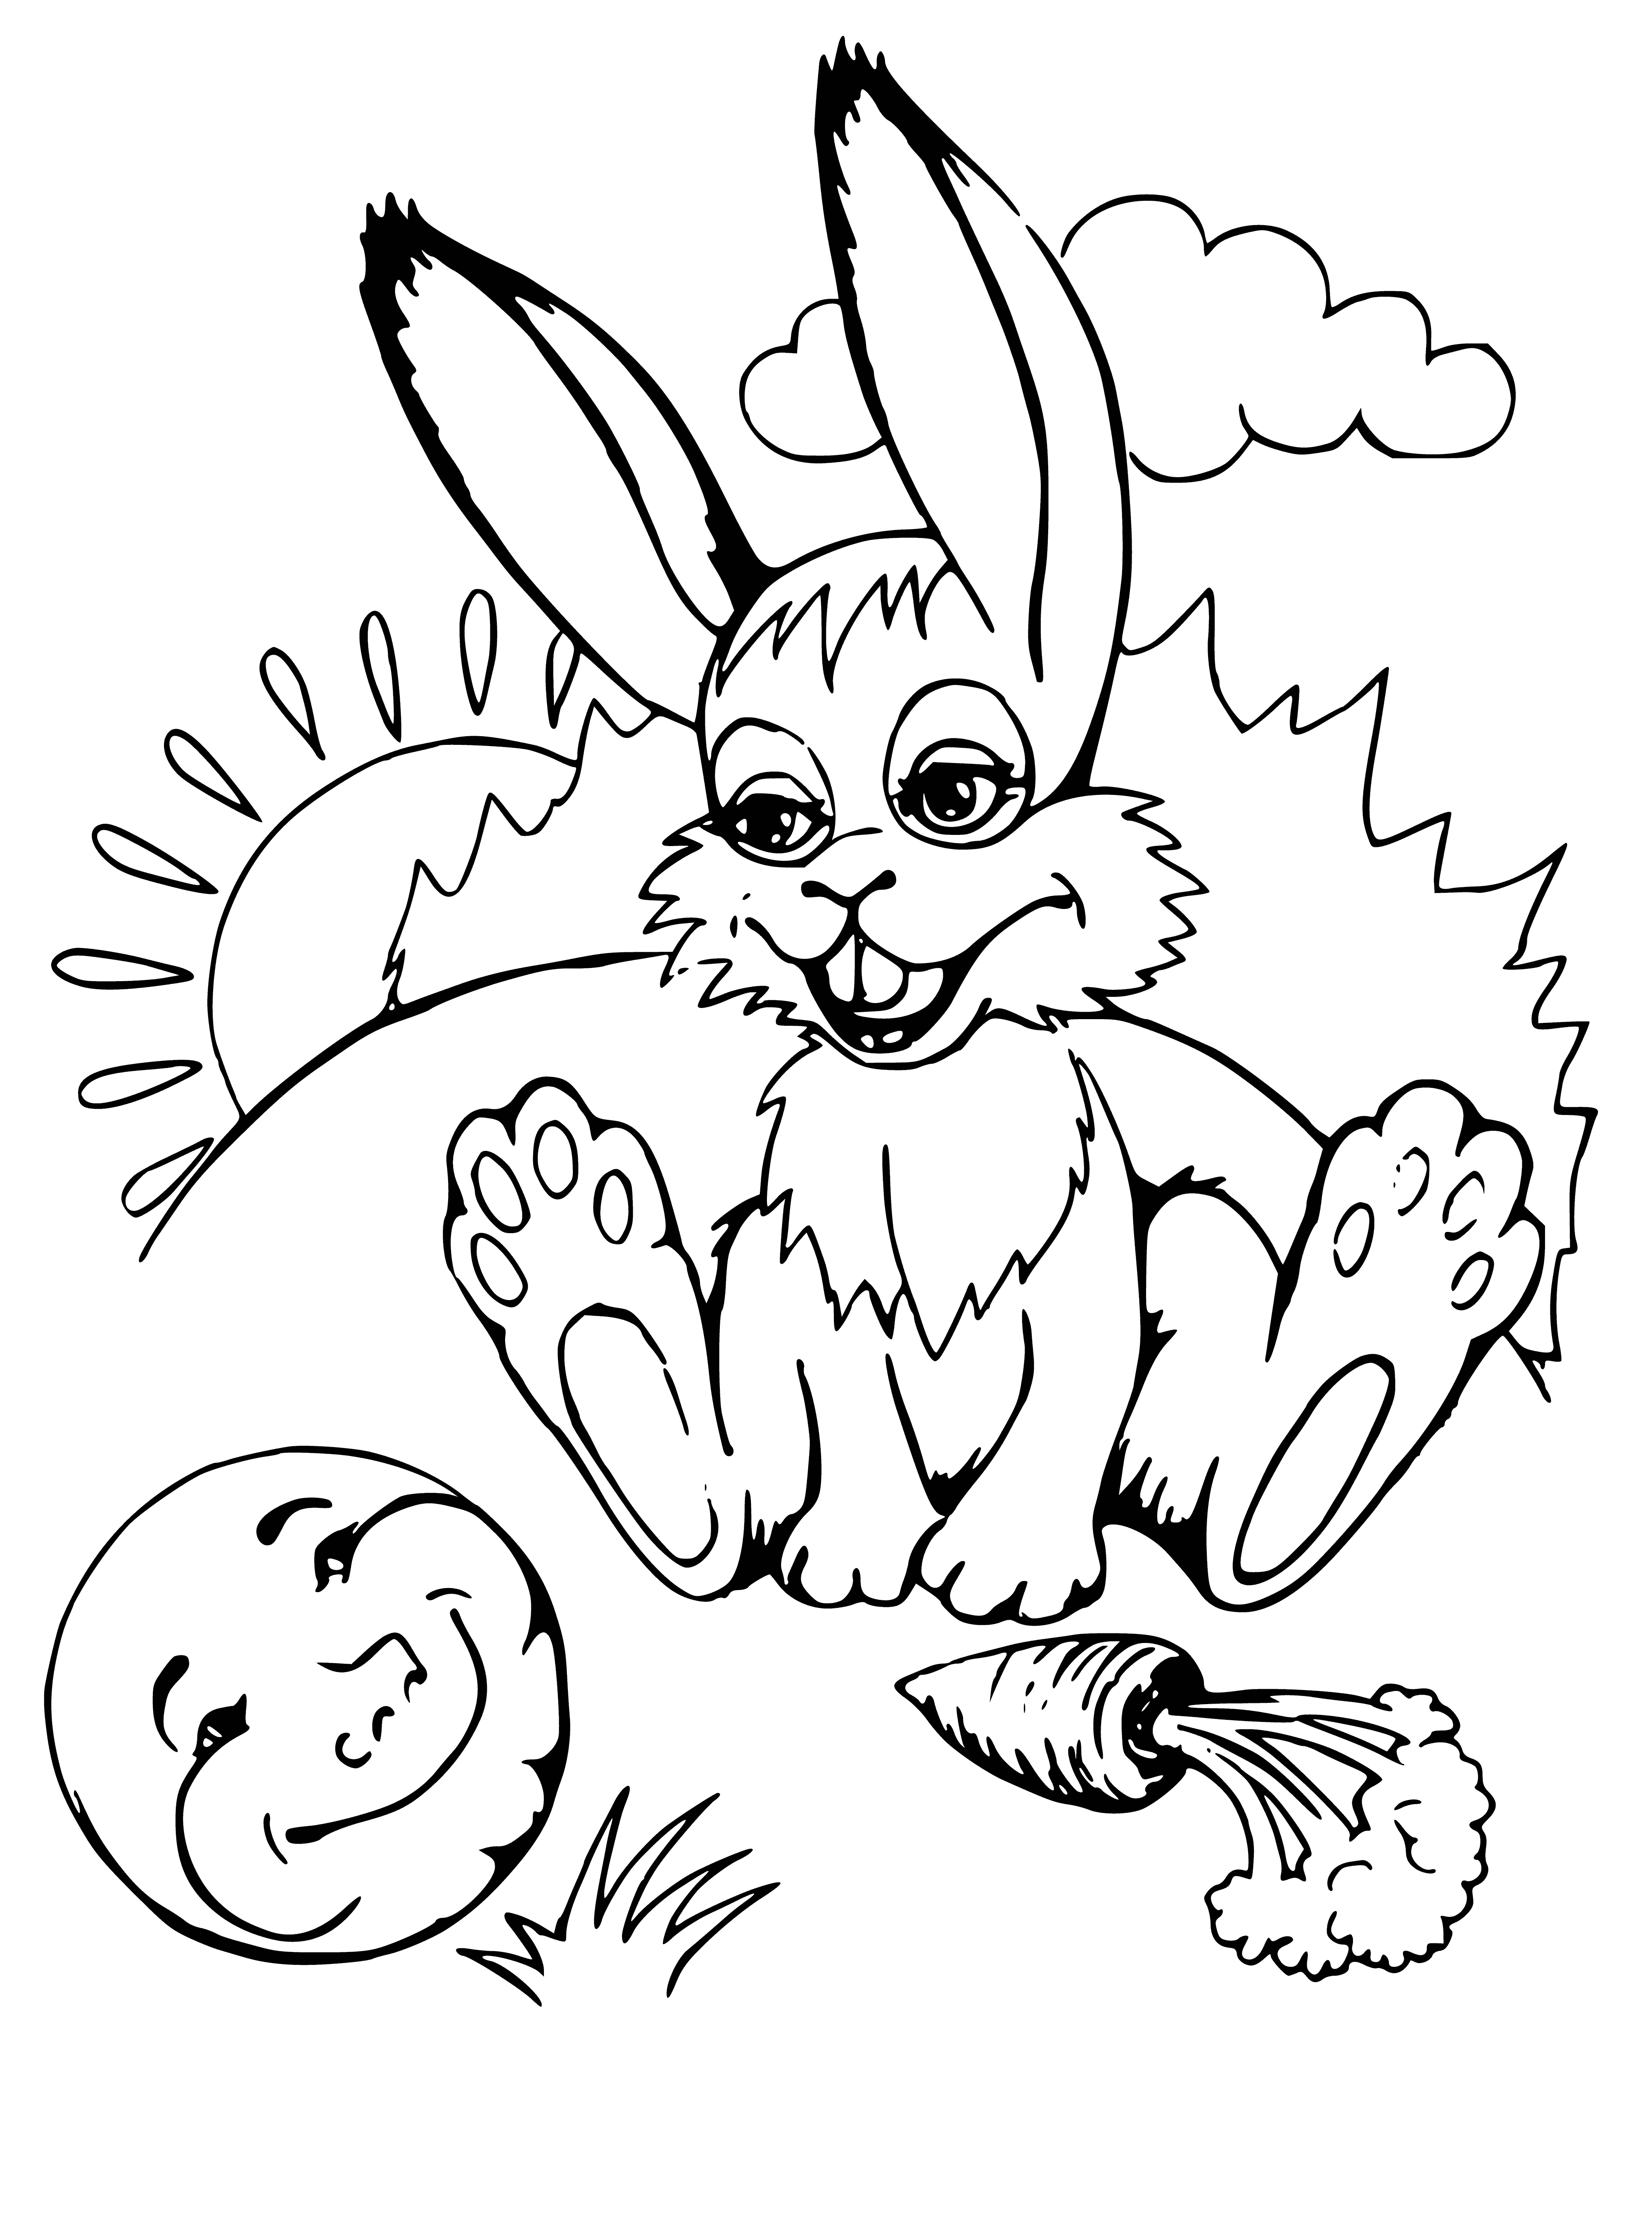 The hare sees a bun coloring page